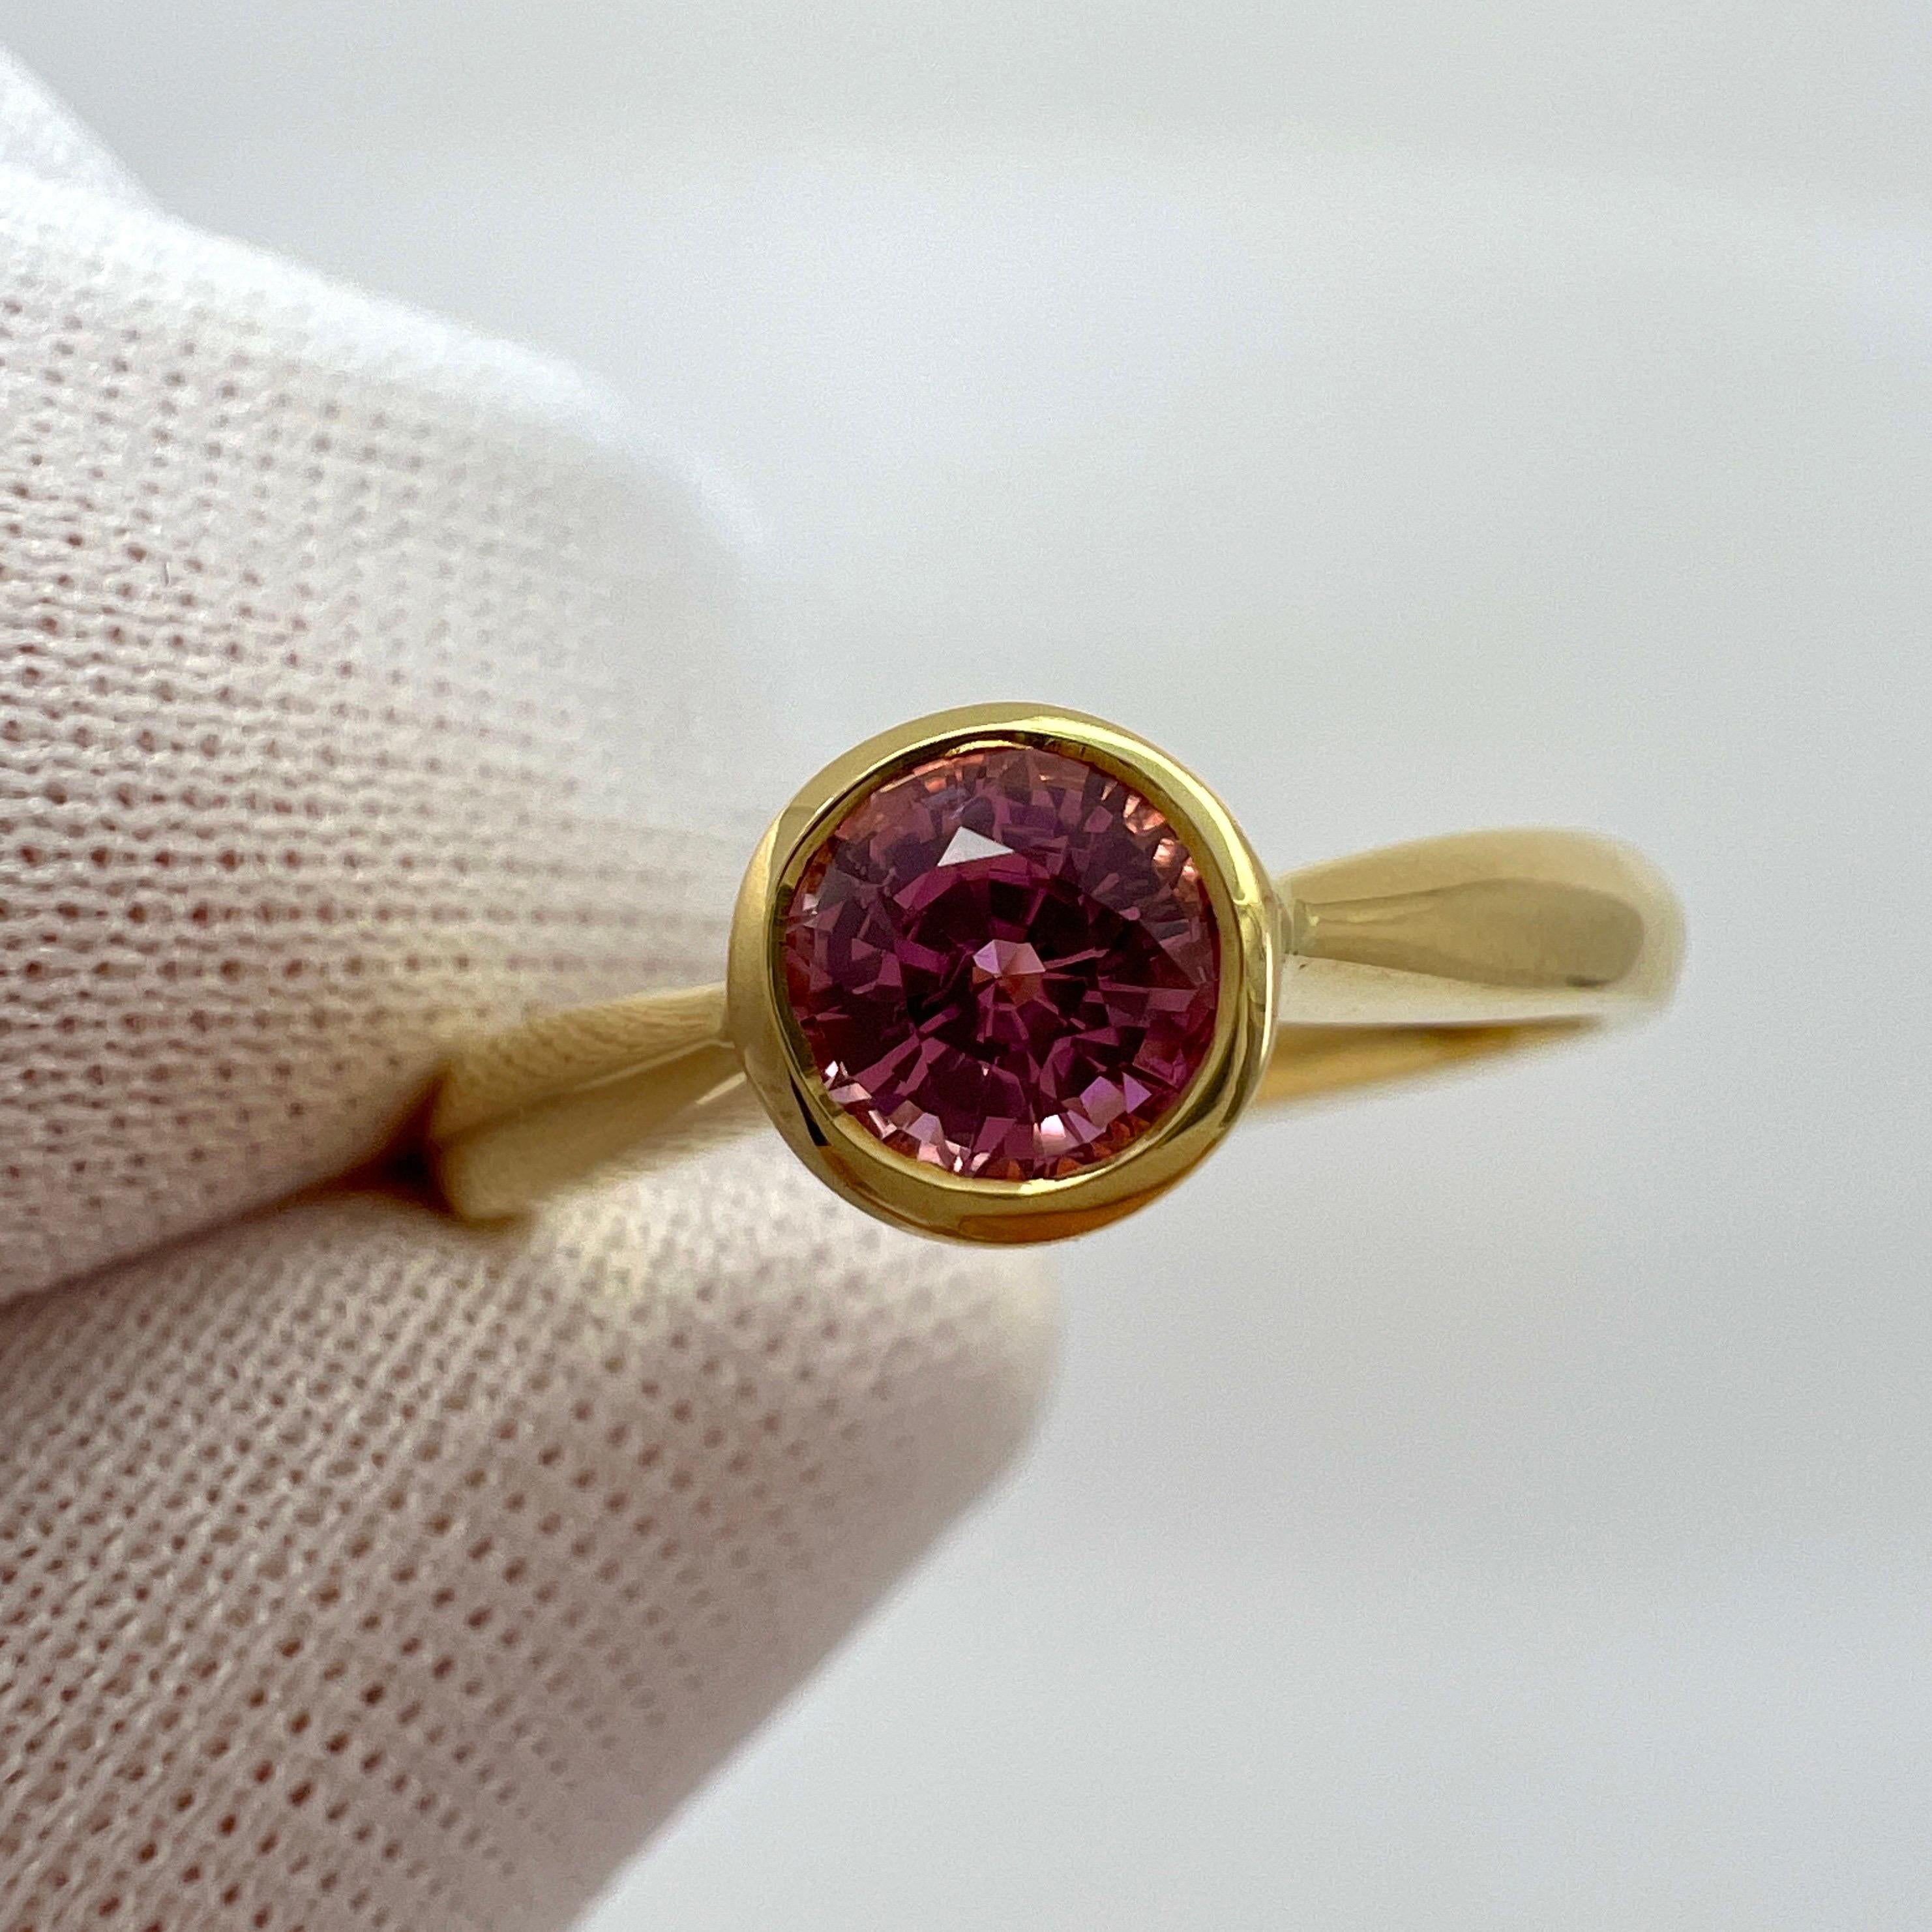 Fine Vivid Pink Natural Sapphire Round Cut 18K Yellow Gold Solitaire Rubover Bezel Ring

0.53 Carat natural sapphire with a stunning vivid pink colour and excellent clarity. Very clean stone. 
Also has an excellent round brilliant cut which shows